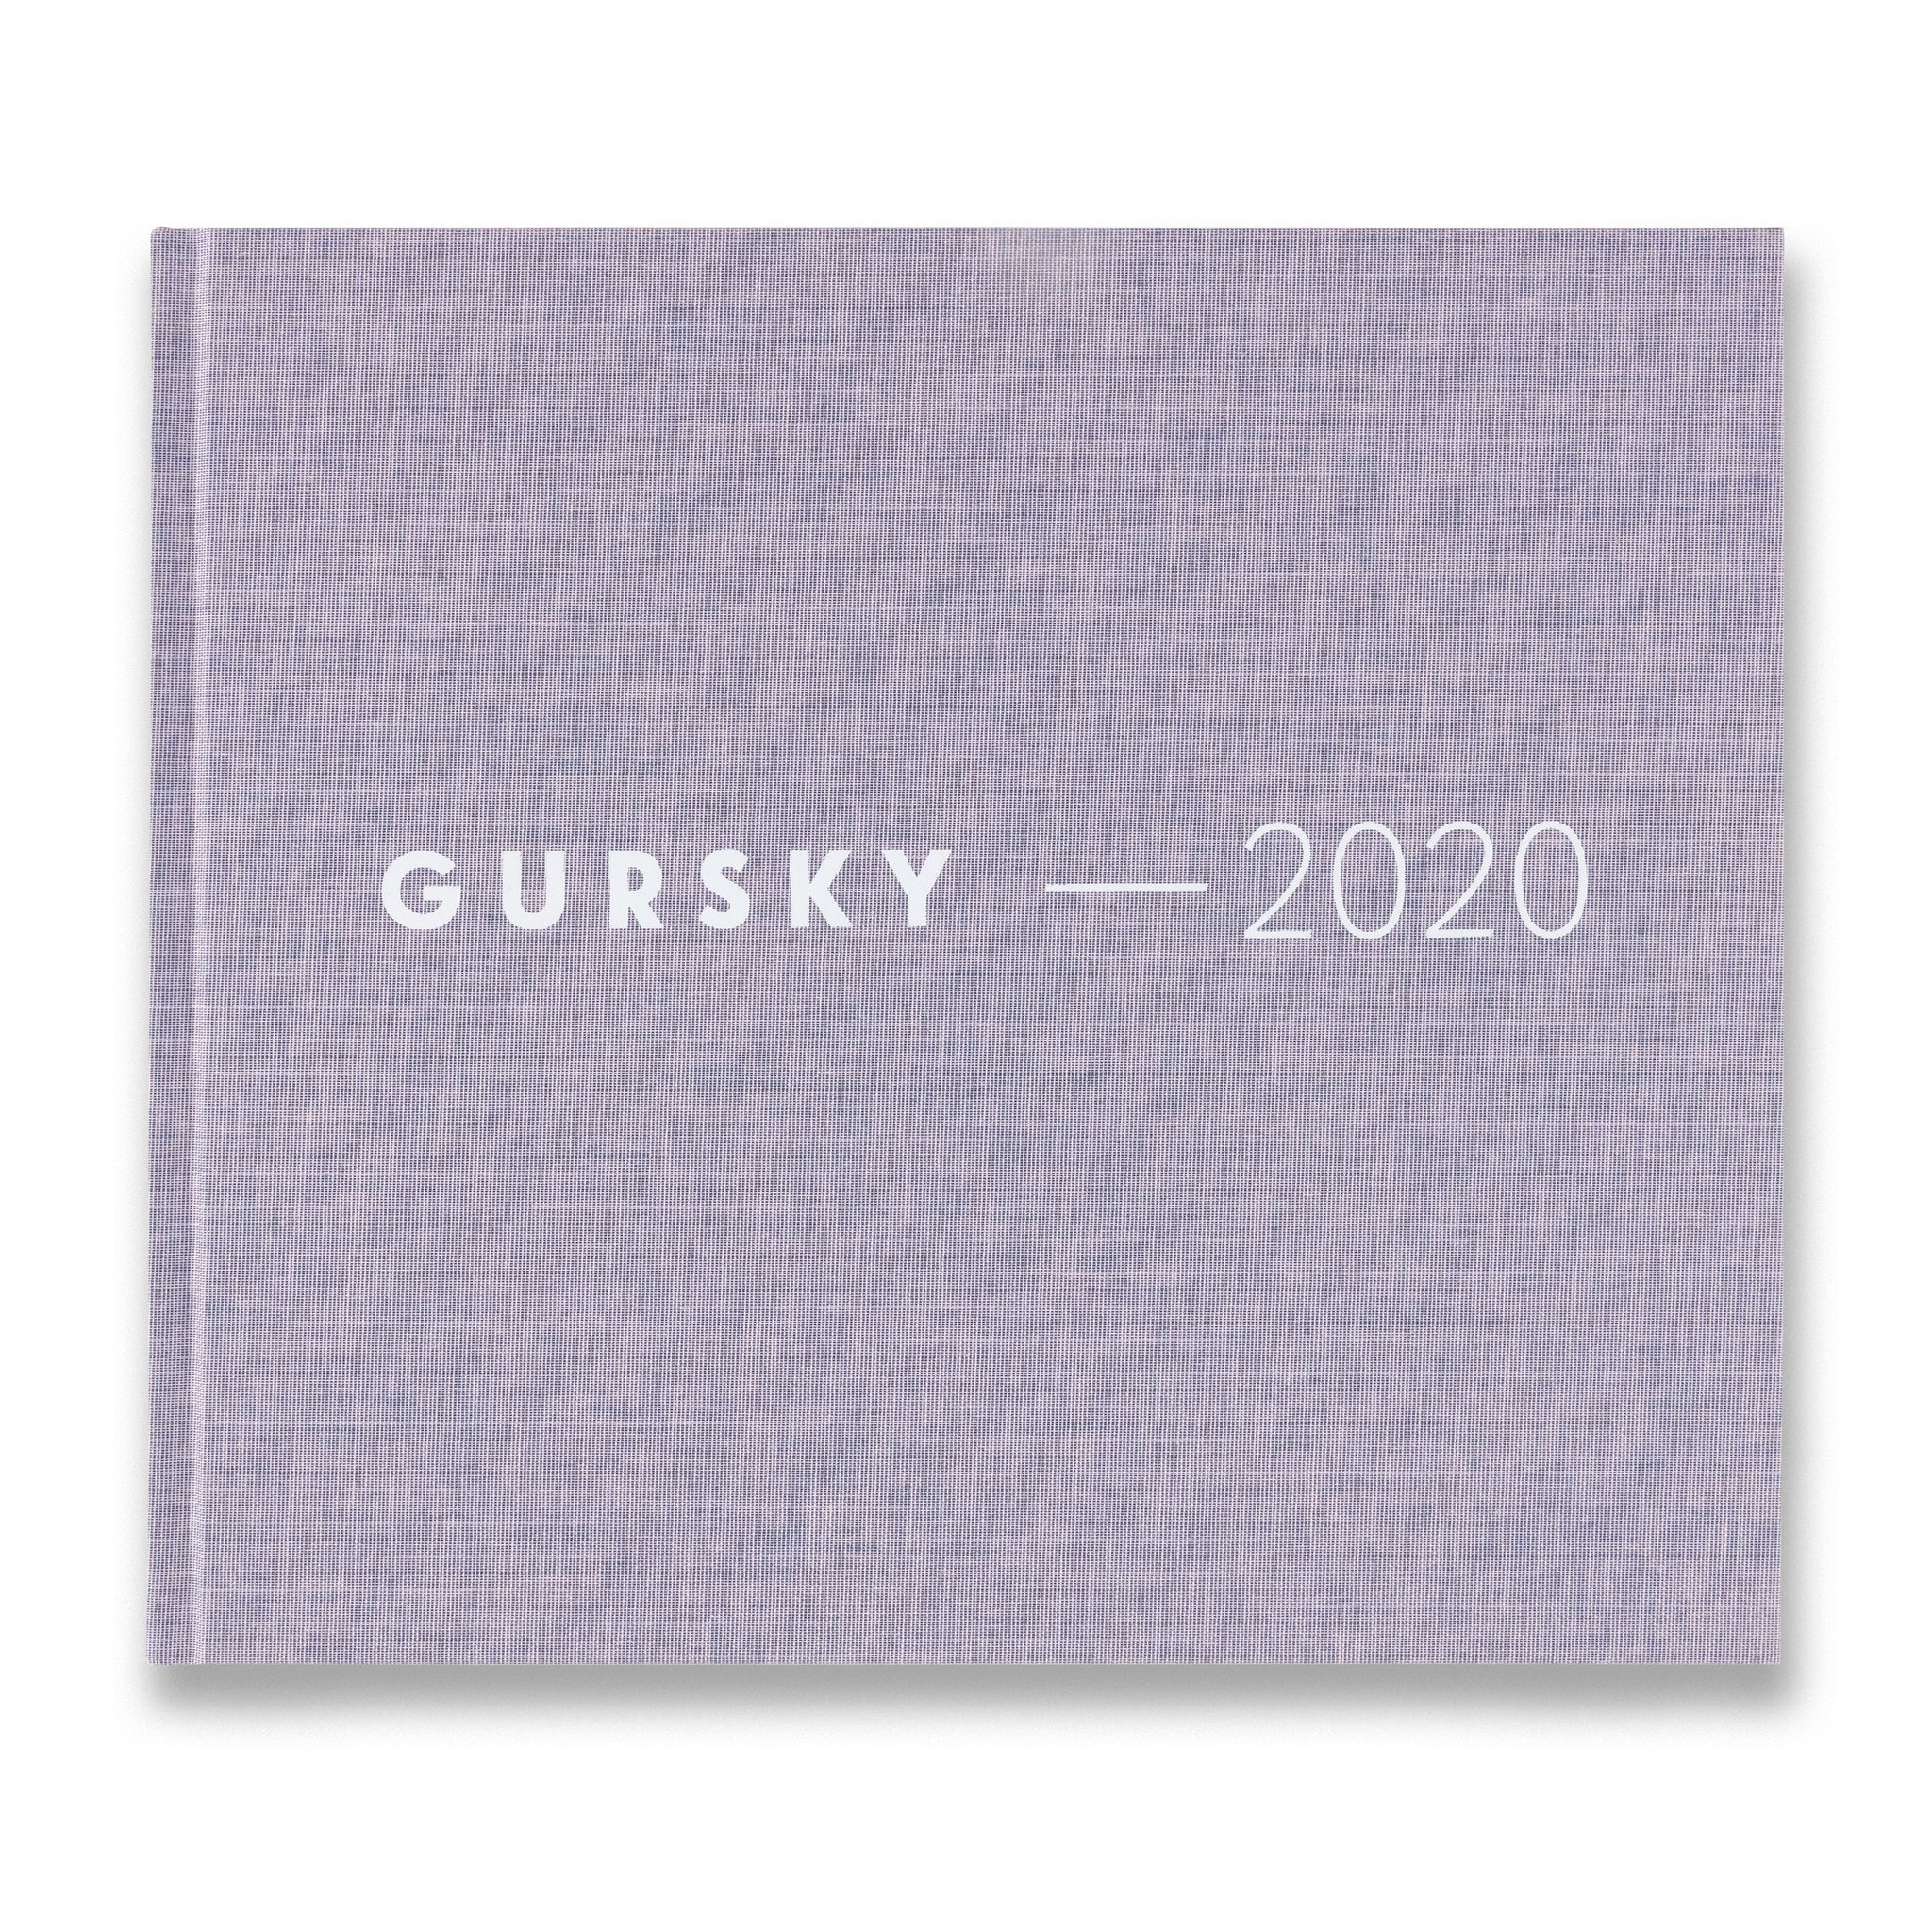 Cover of the book Gursky—2020